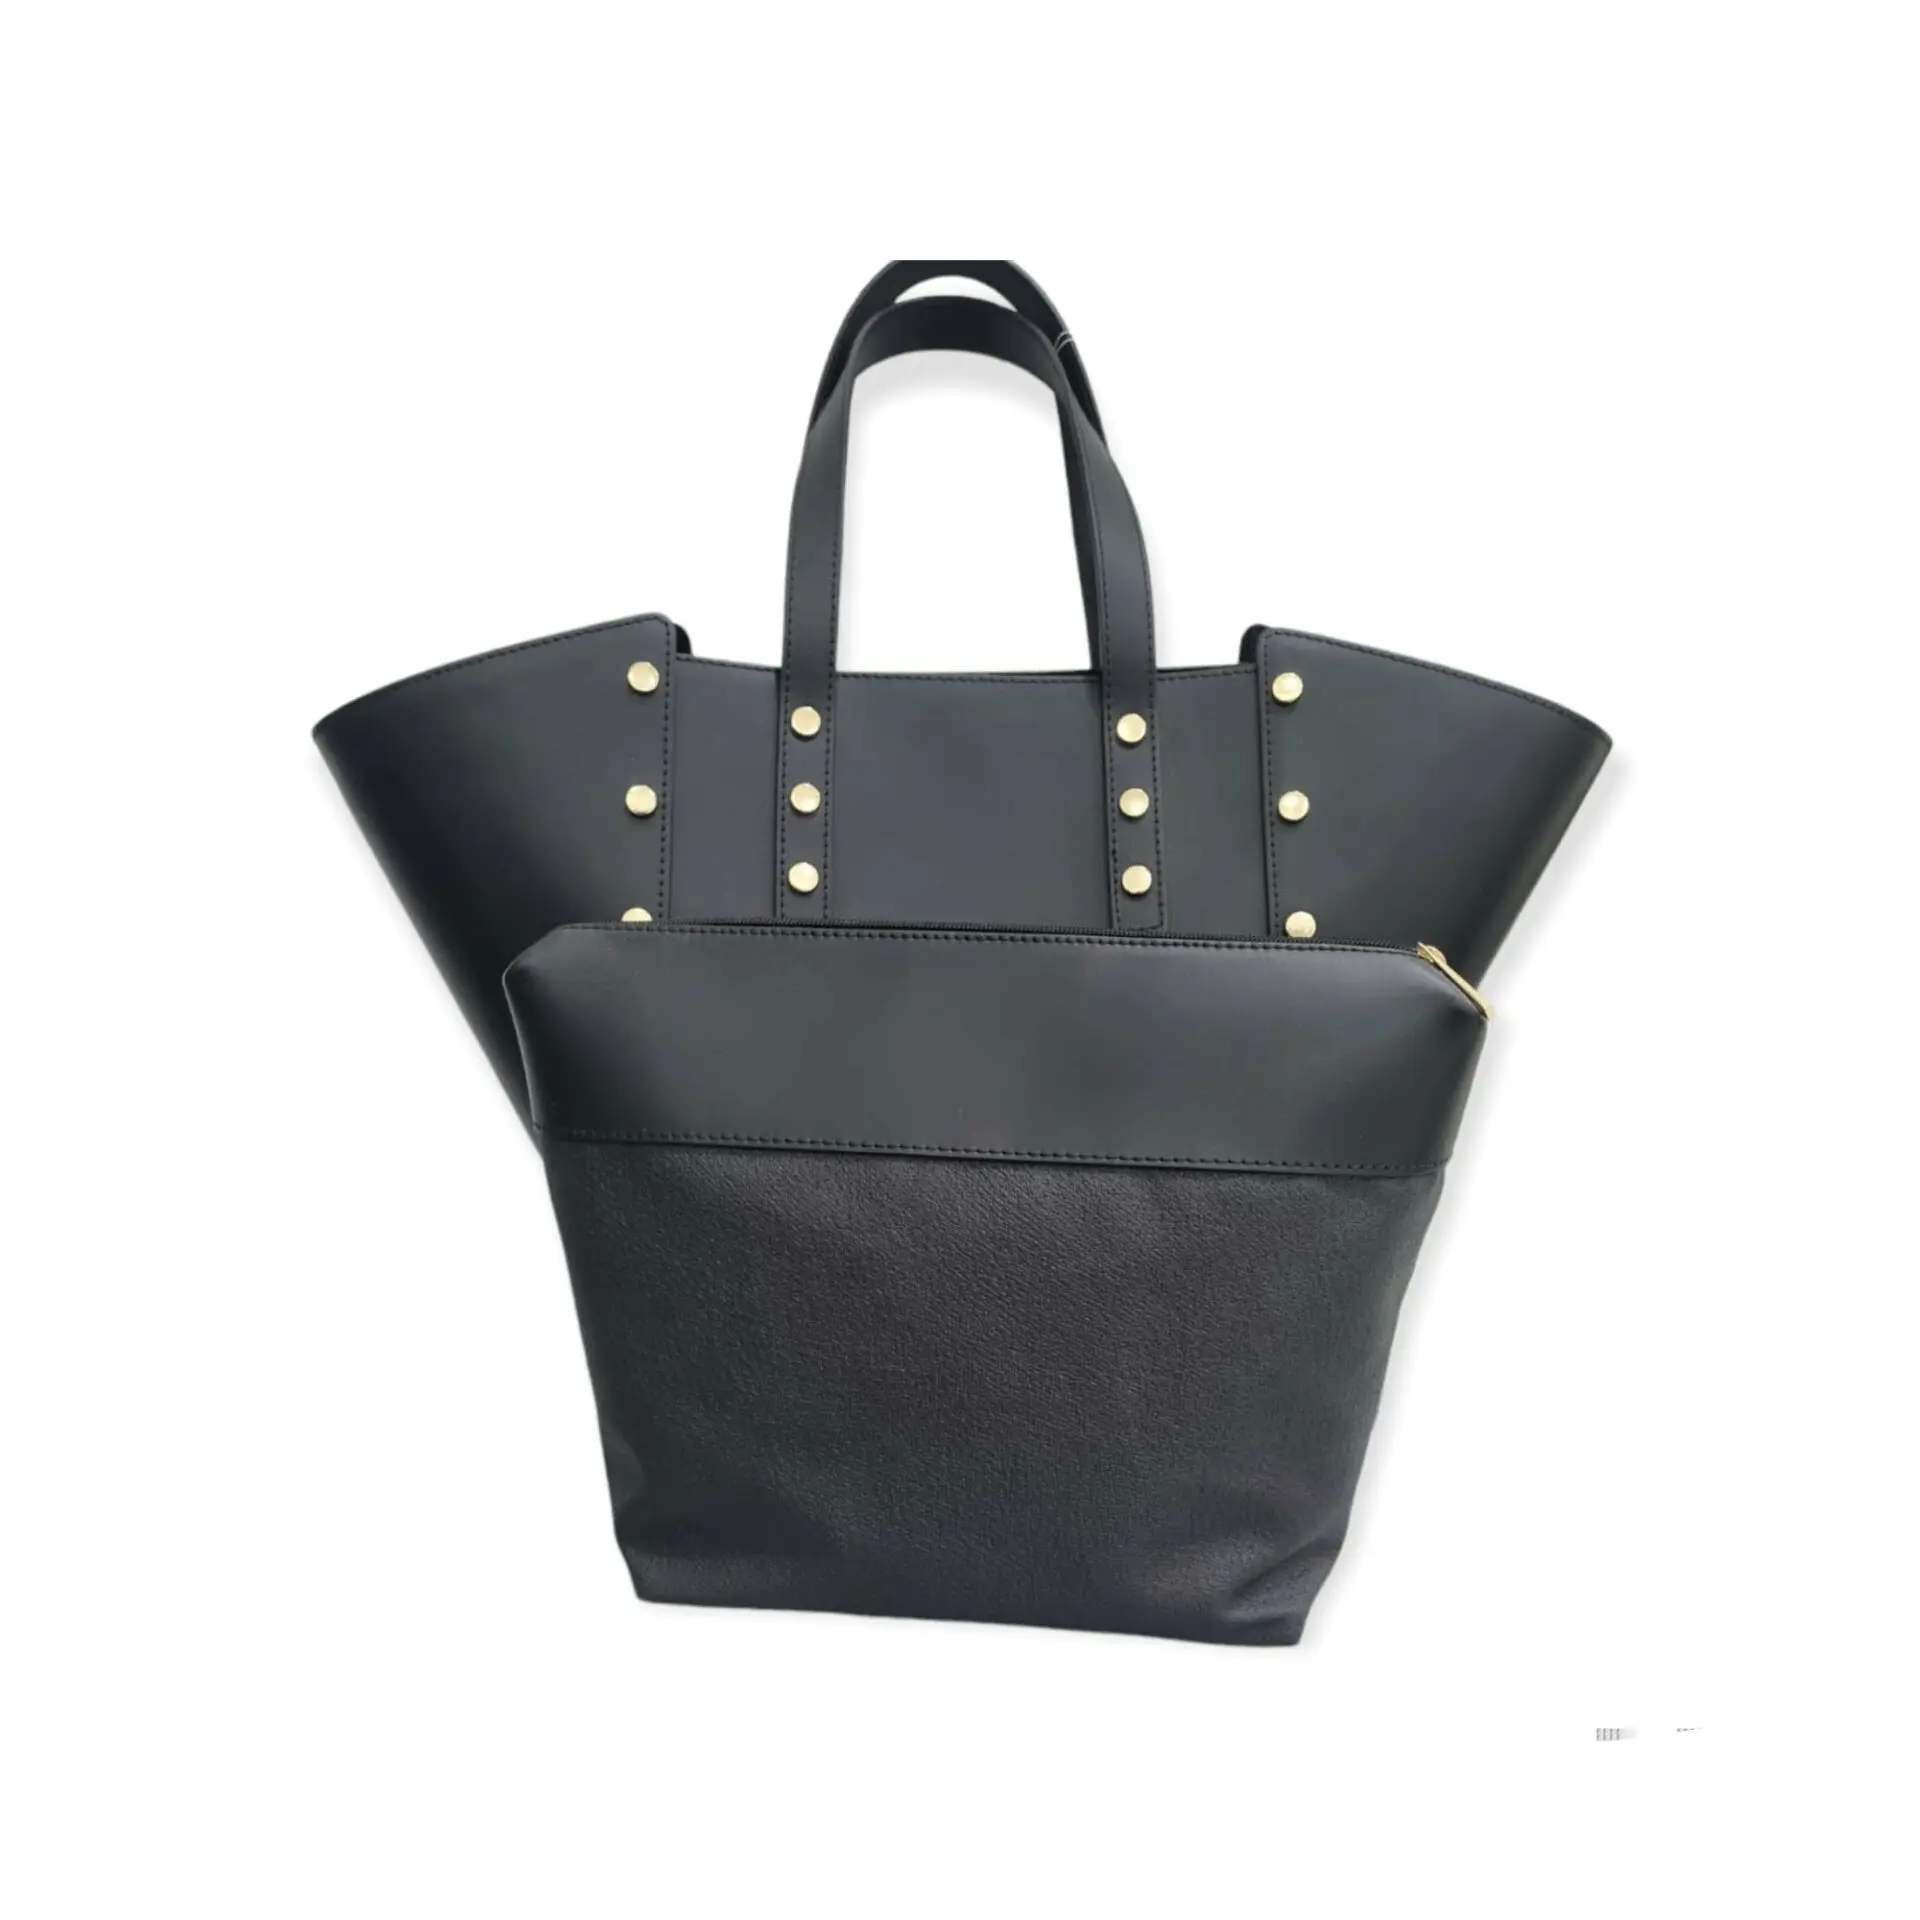 Genuine leather bag, made in Italy, black color with very large gold studs, button closure. Equipped with a removable internal bag with zip closure. bag measurements Mouth 56cm, base 14cm, length 25cm, height 32cm, tops 21 cm. Internal bag measurements length 25/30cm, height 25cm, base 13cm.